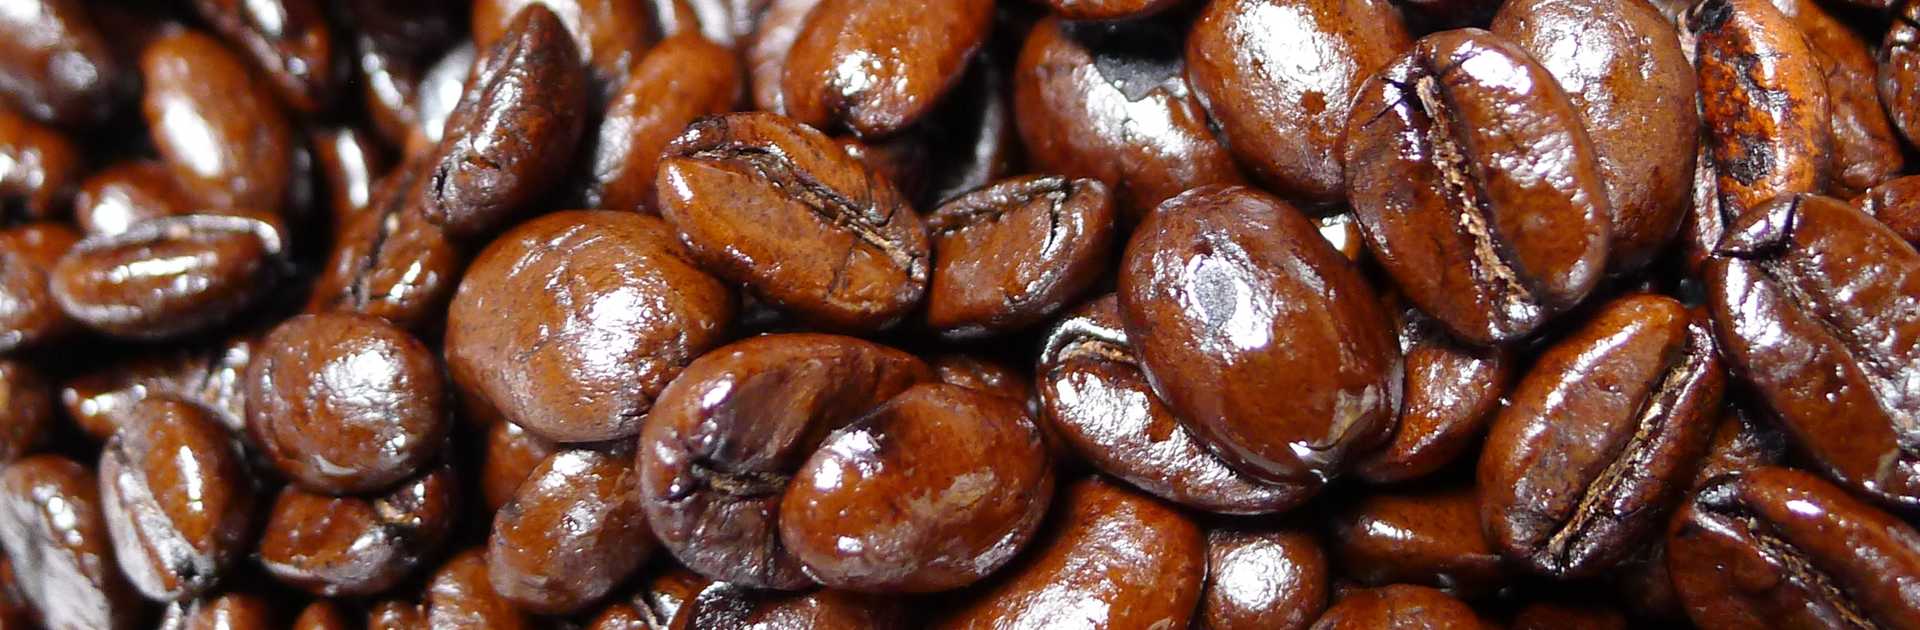 Roasted coffee beans close up